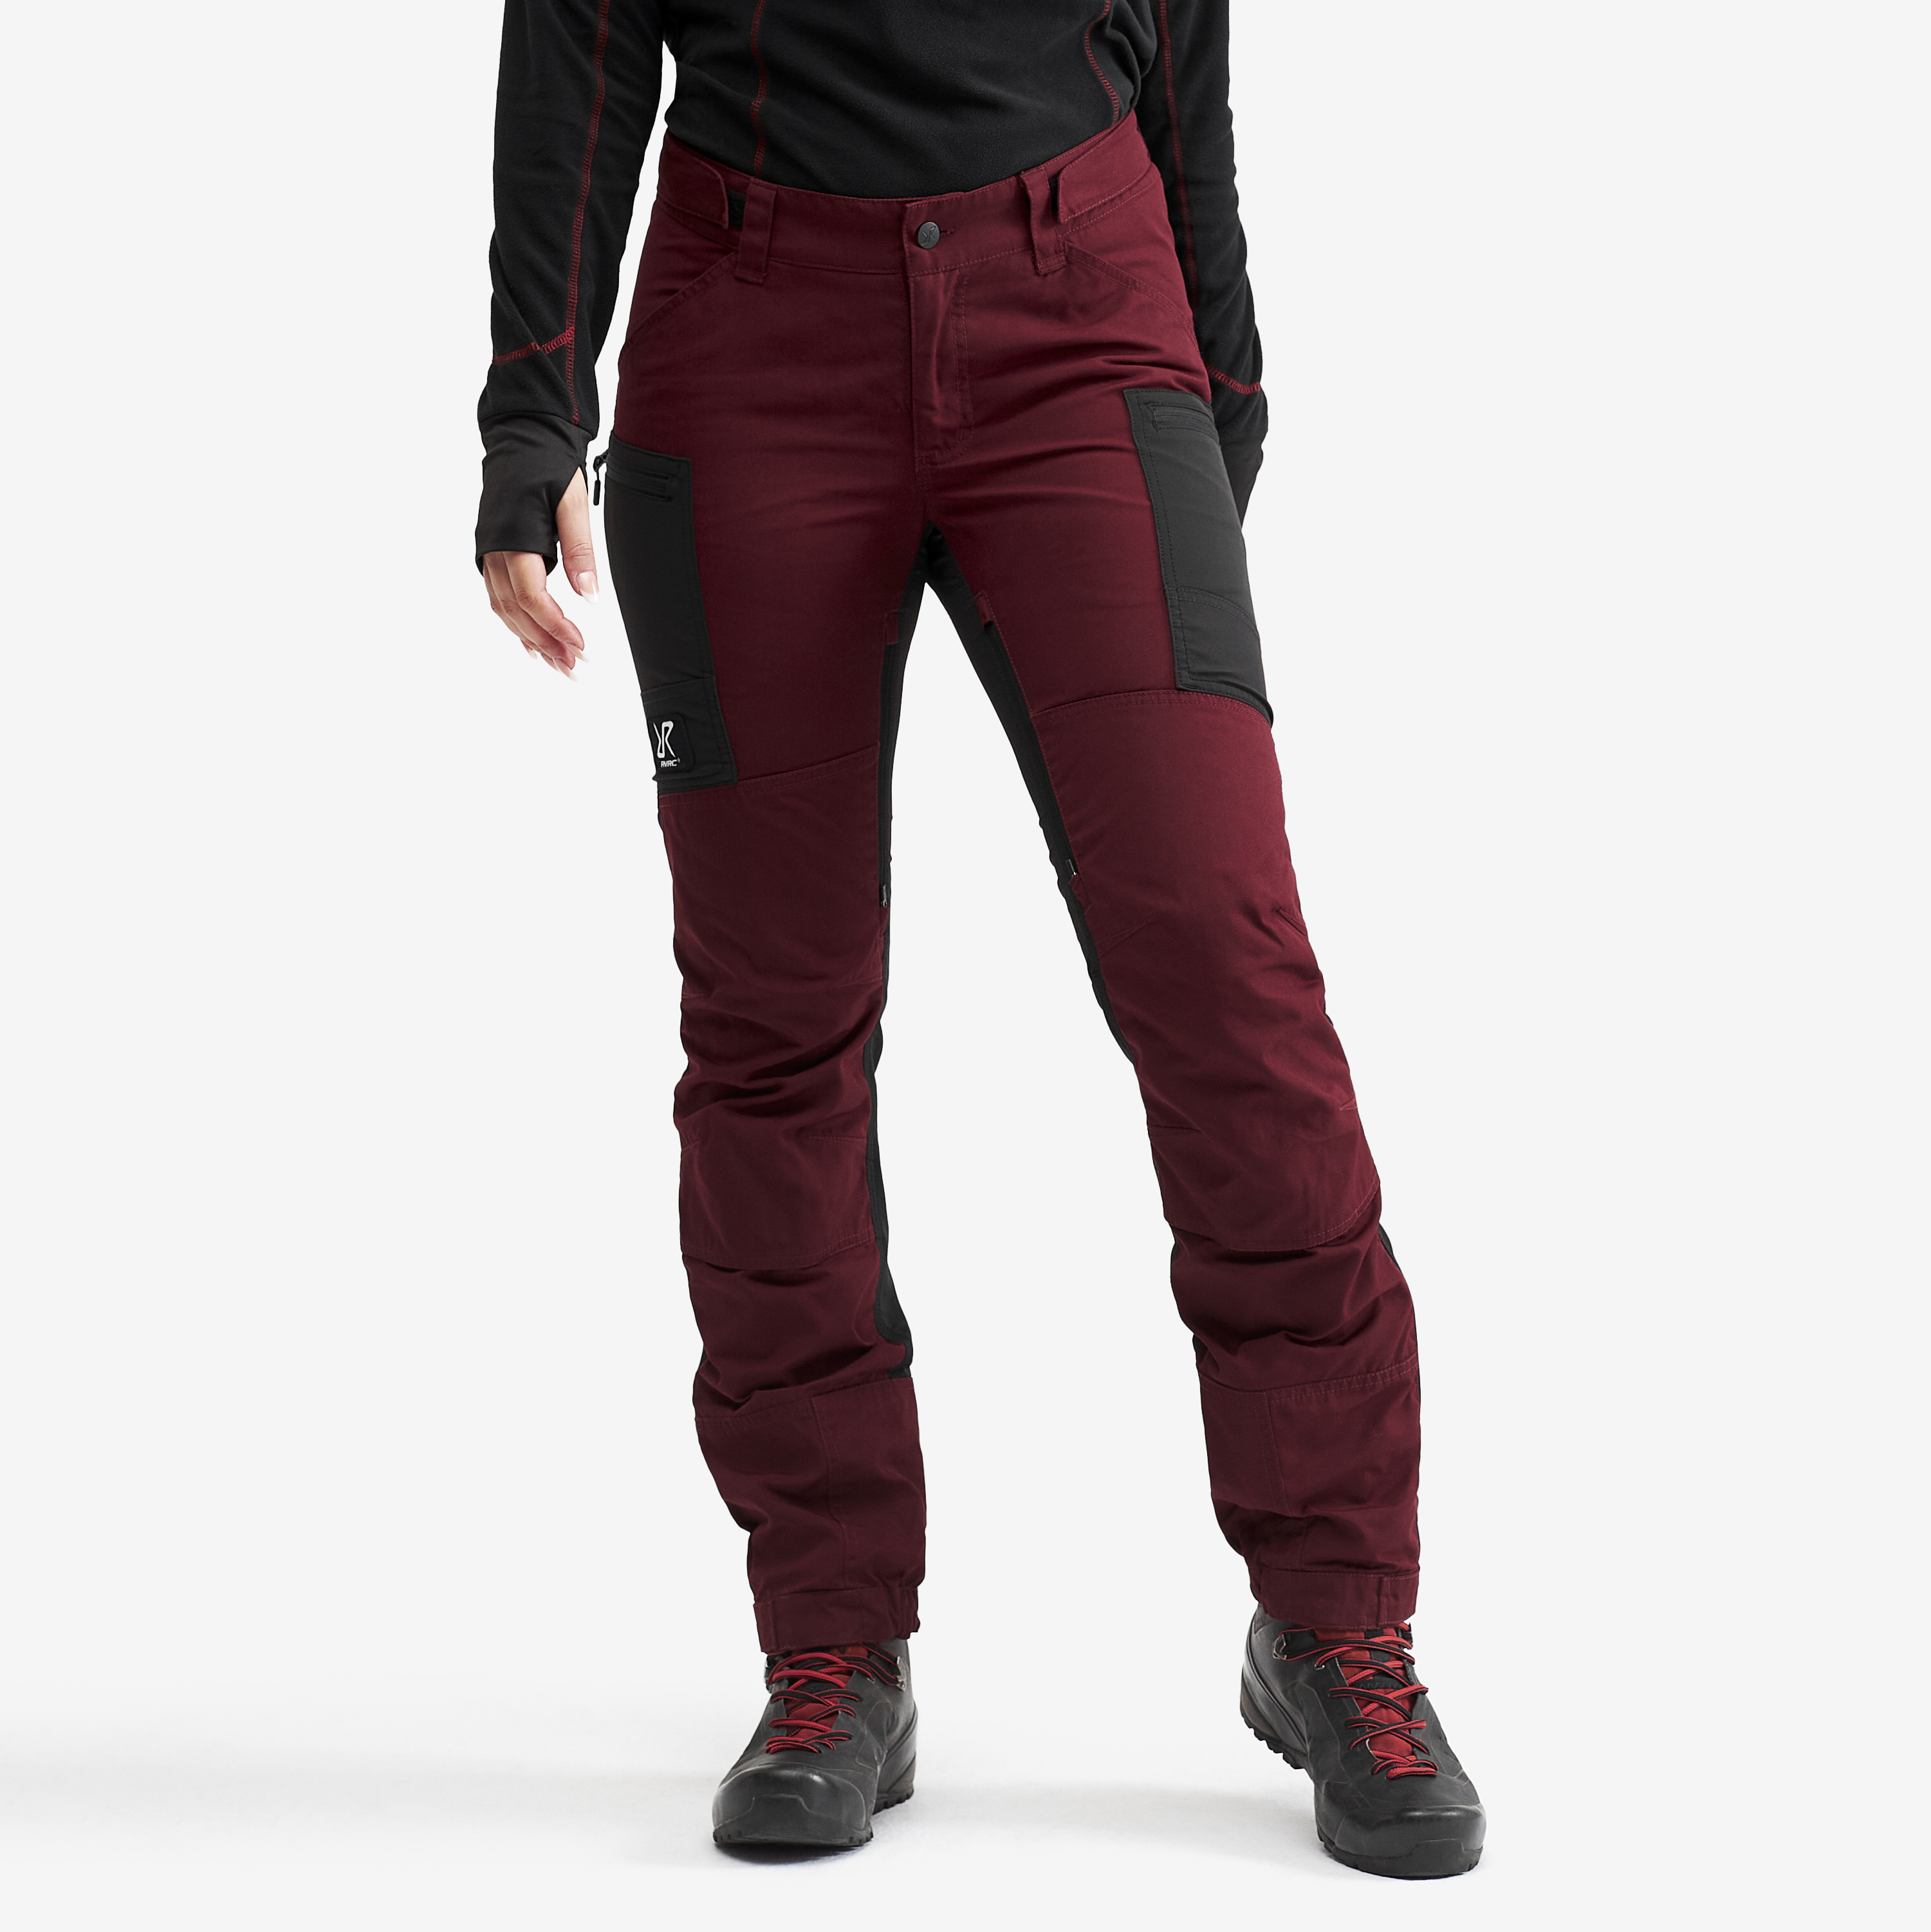 Wander Pro Pants Bison Red Mujeres